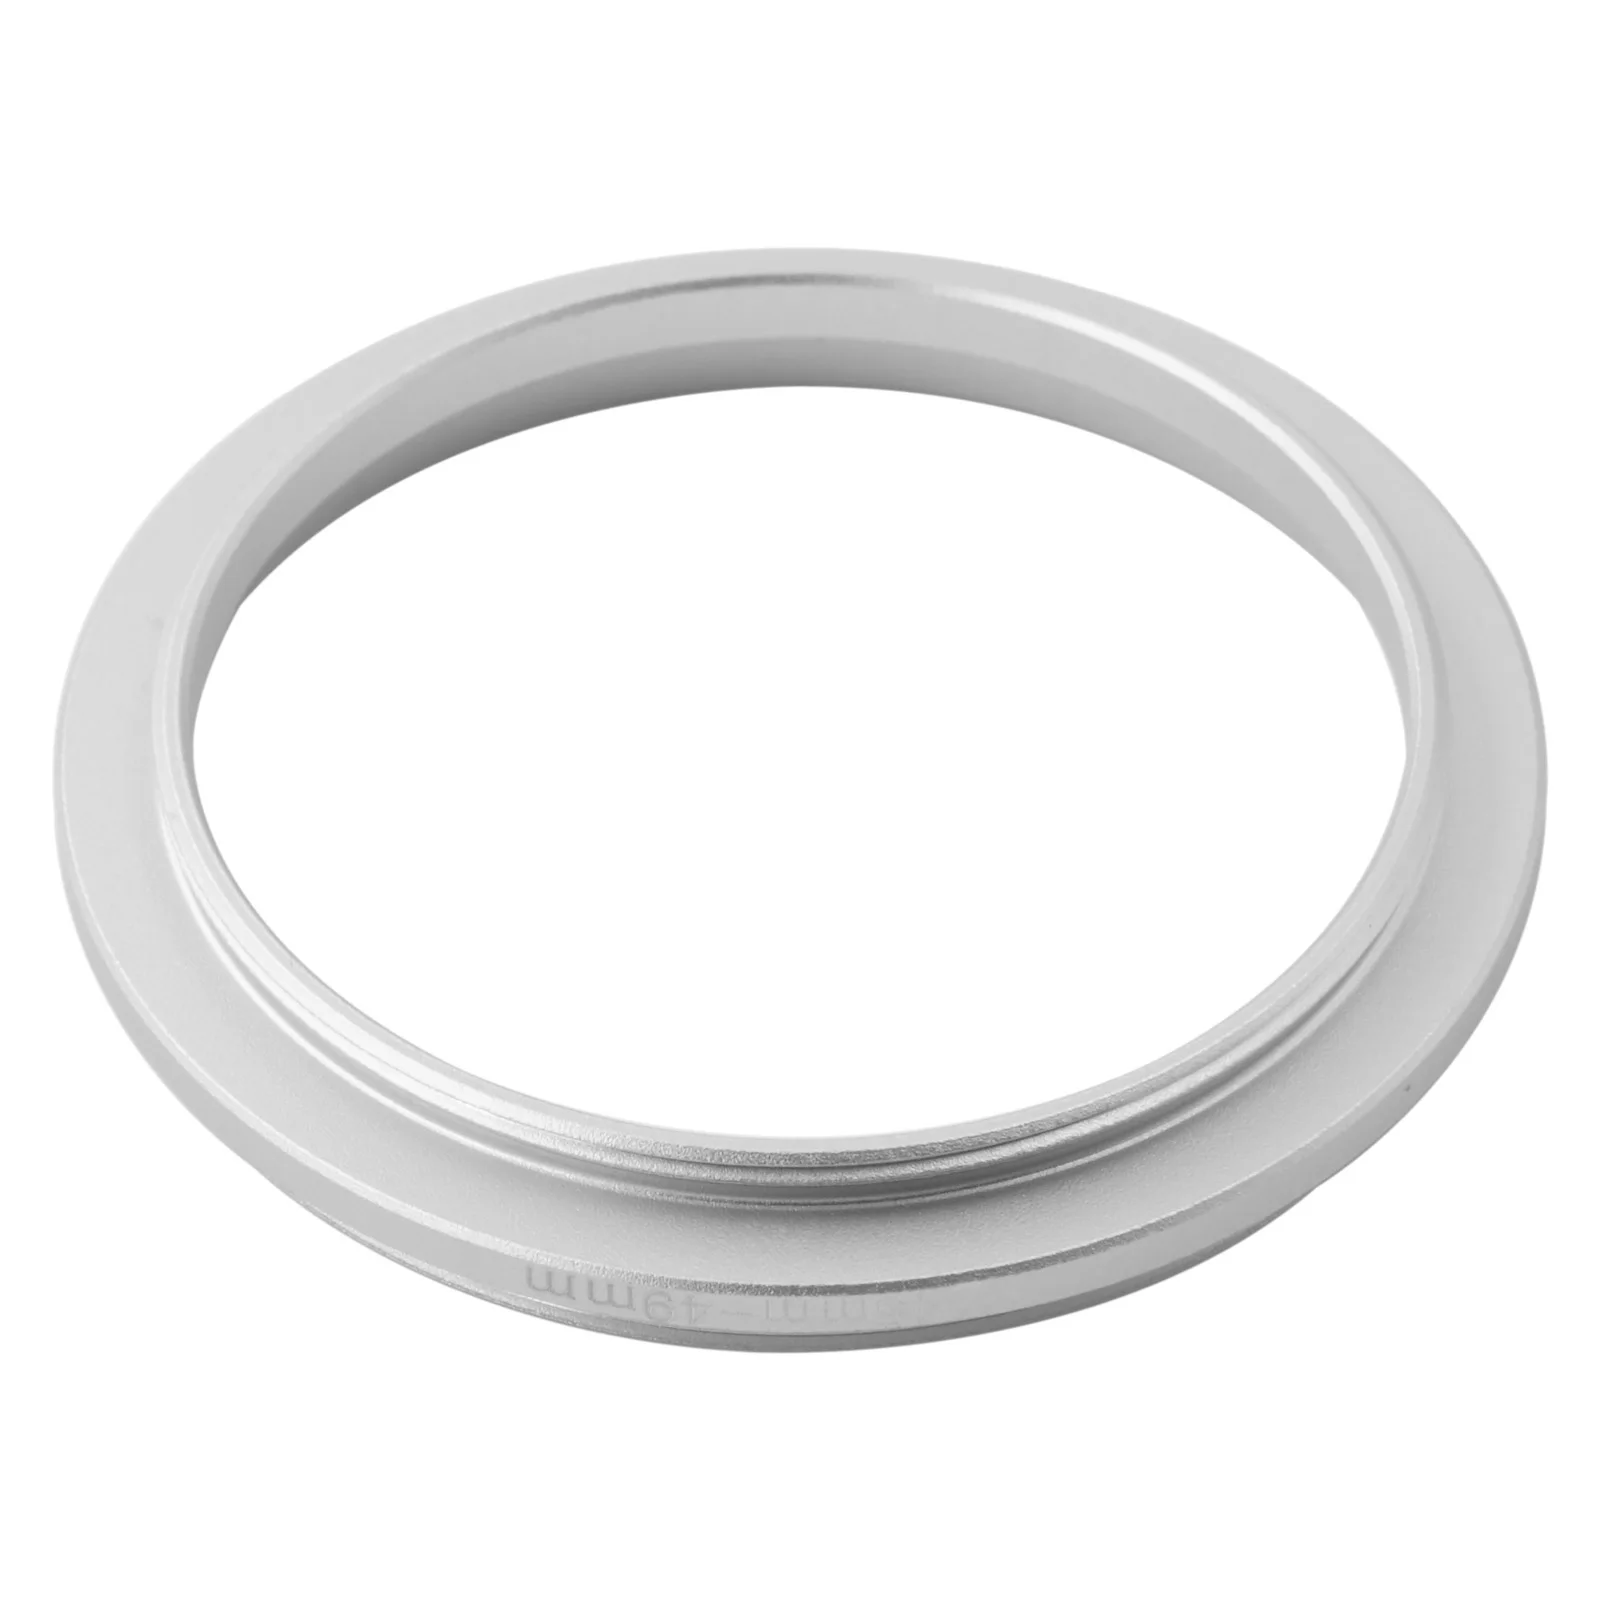 45-49 Male to Male 45mm x0.75 - 49mm x0.75 Double Outer Thread Lens Adapter Ring